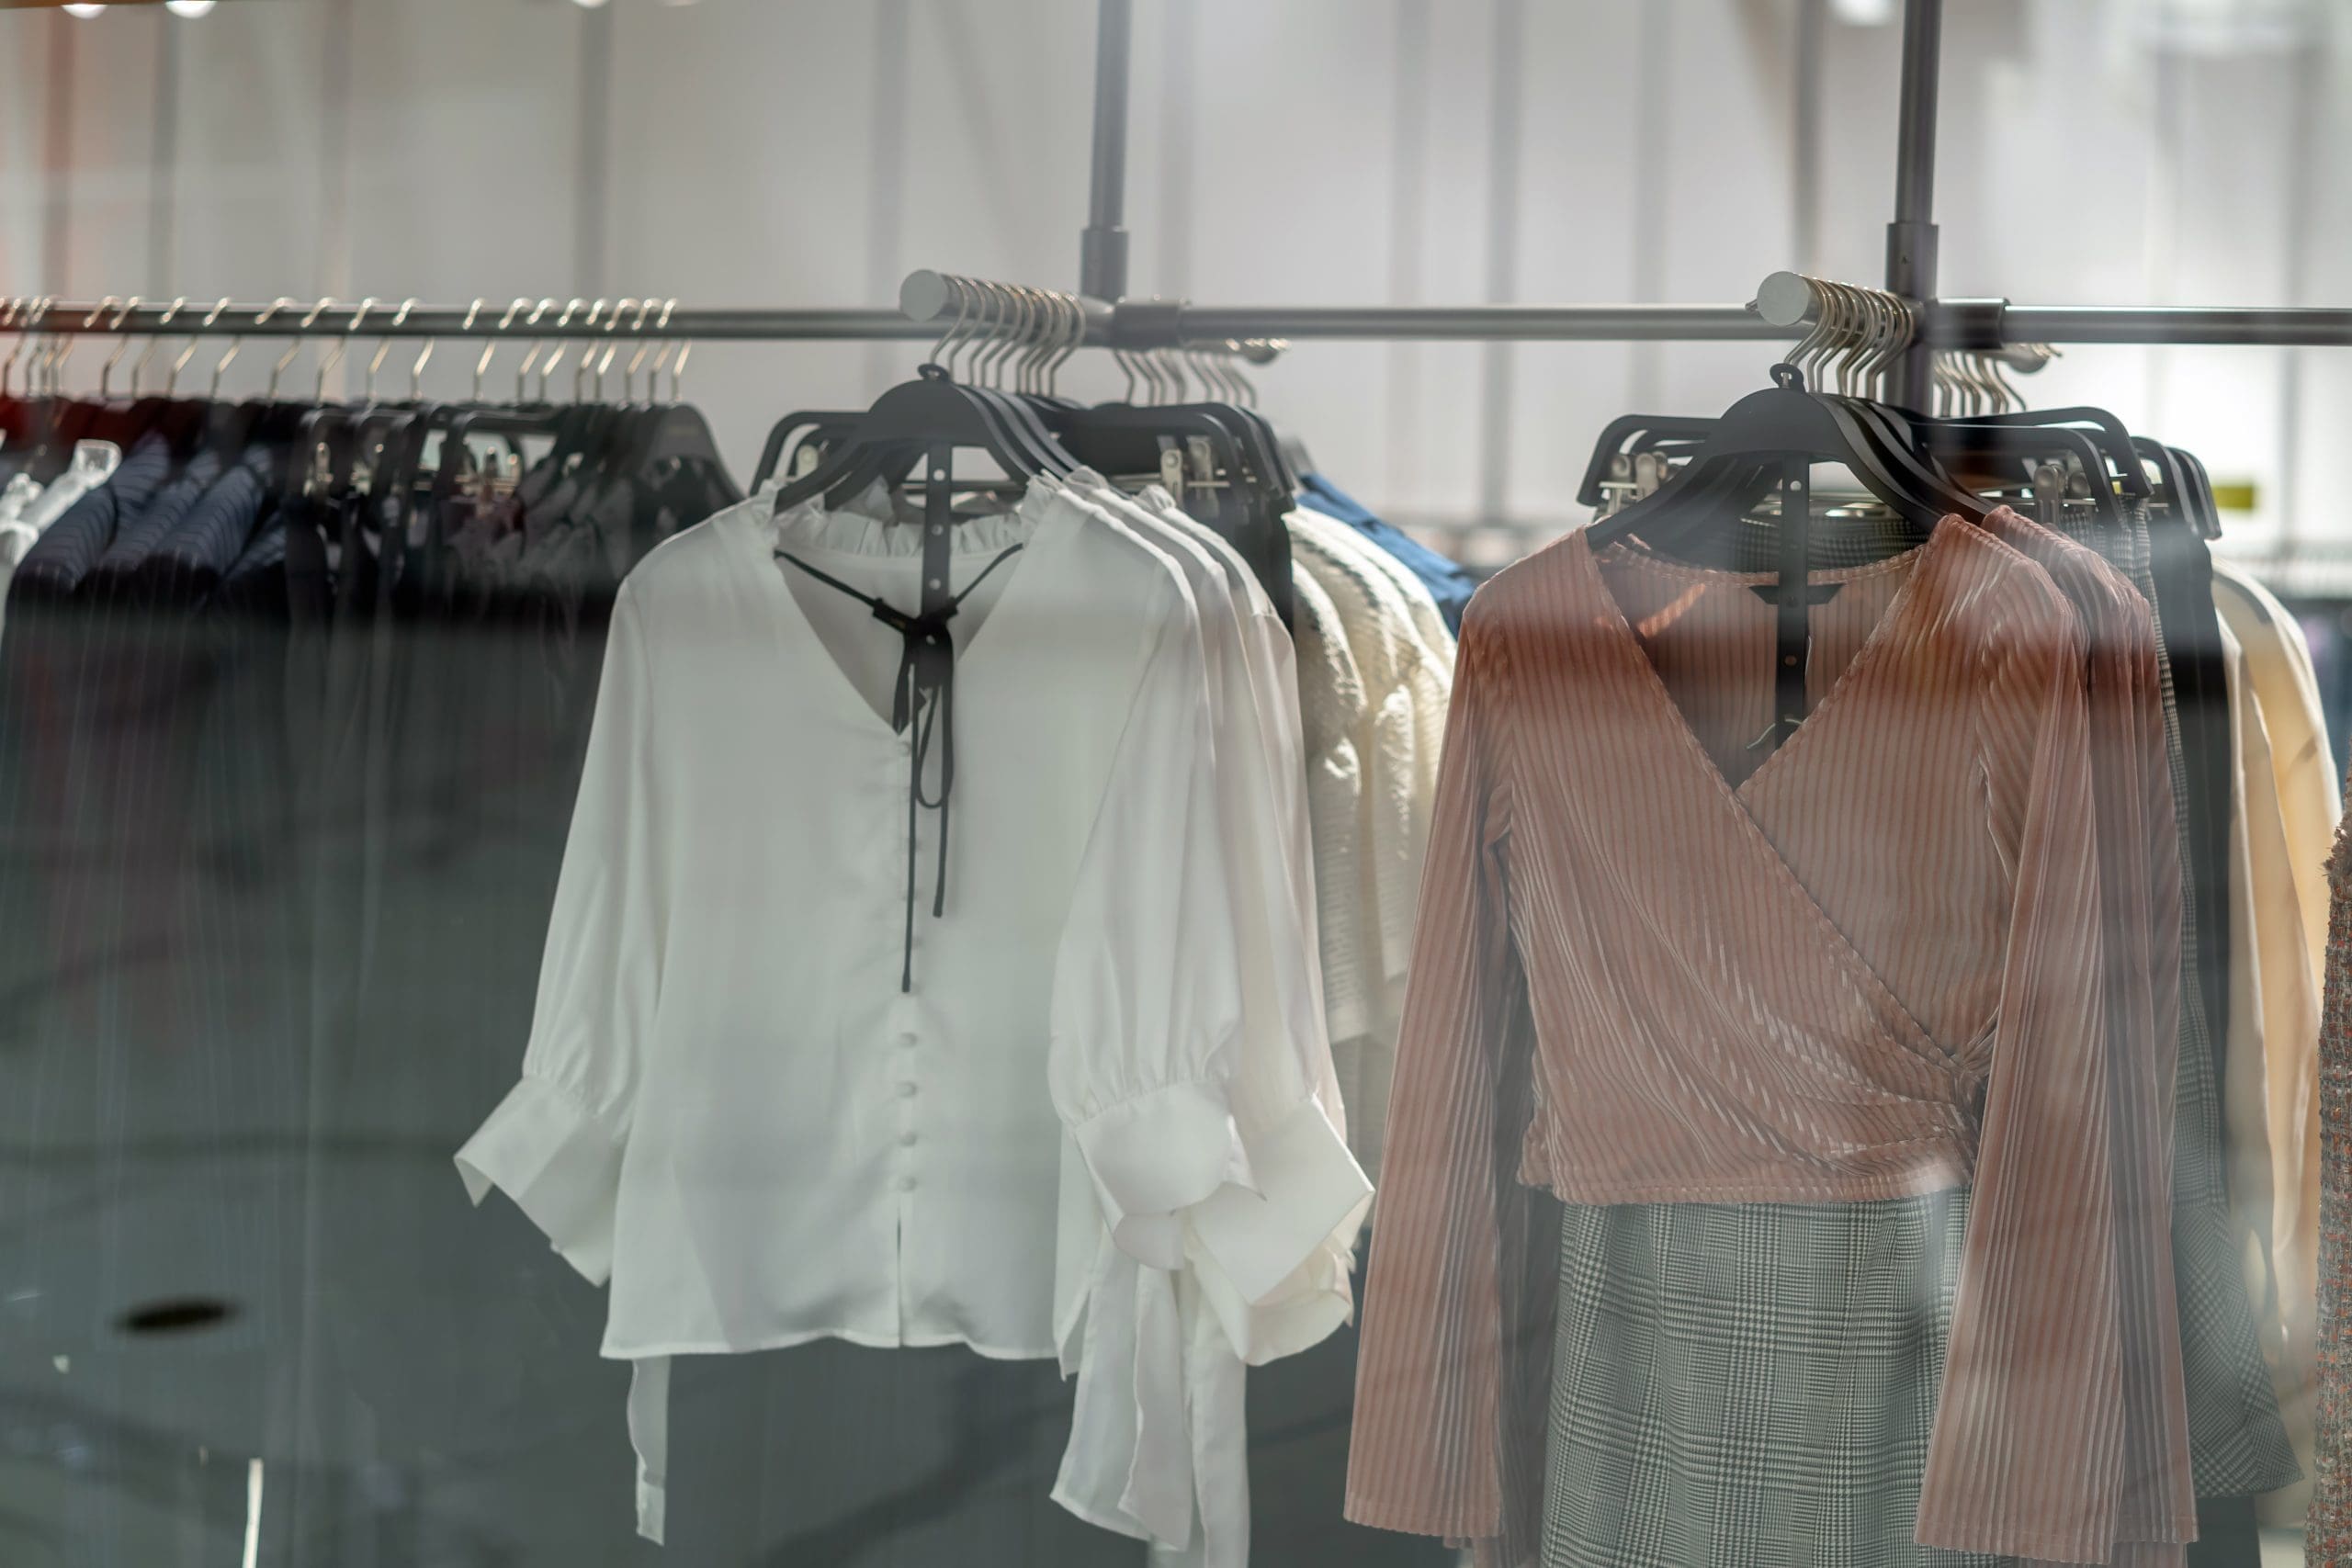 Exploring Different Types of Retail Displays: Grid Displays, Heavy Duty Clothes Rail and Mannequins